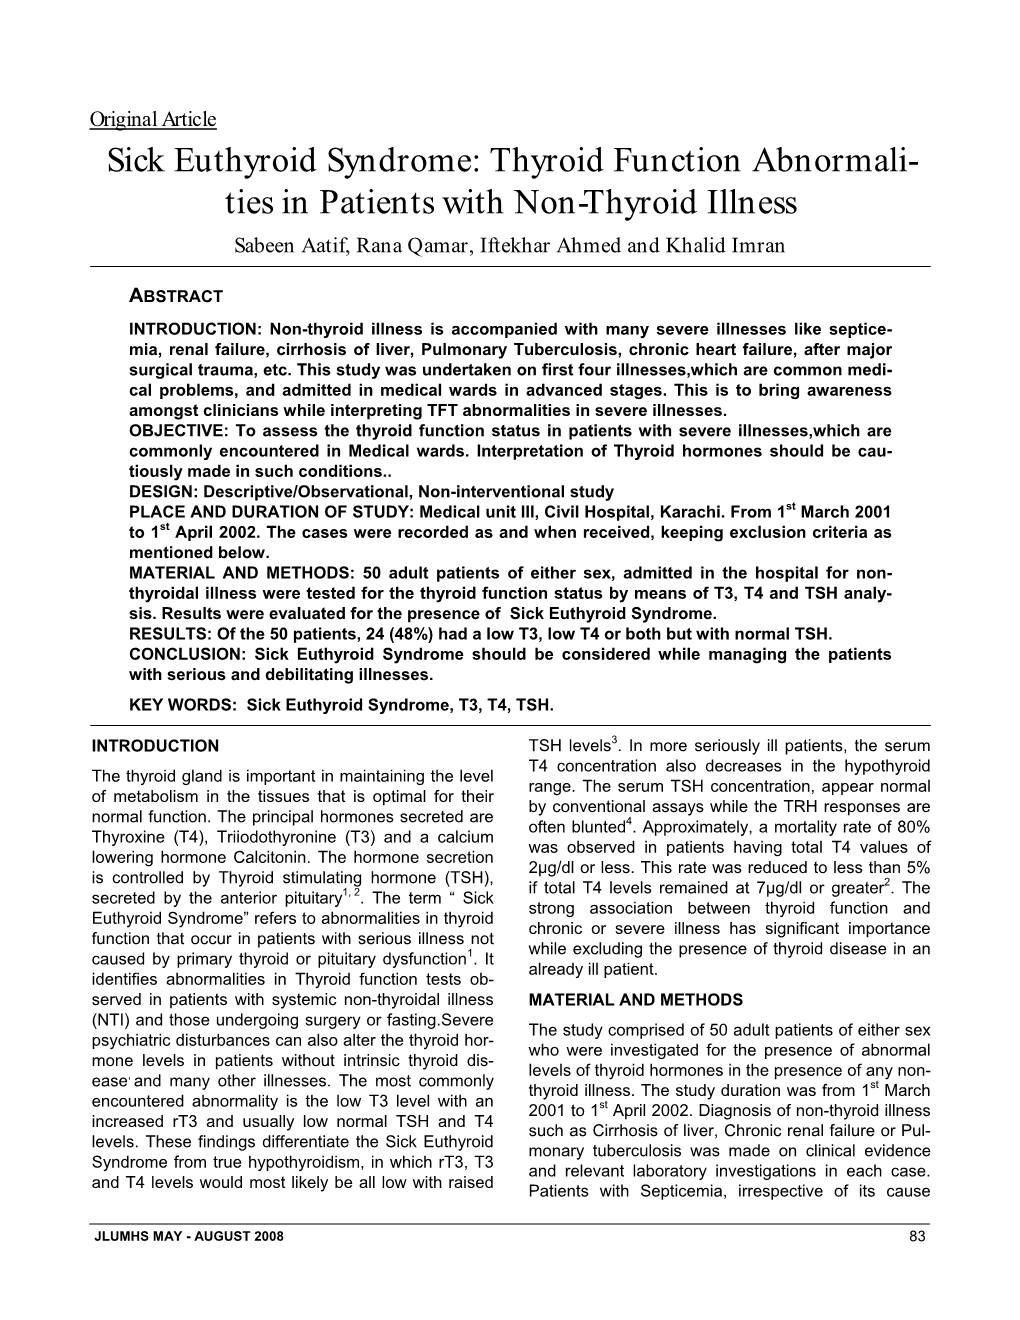 Sick Euthyroid Syndrome: Thyroid Function Abnormali- Ties in Patients with Non-Thyroid Illness